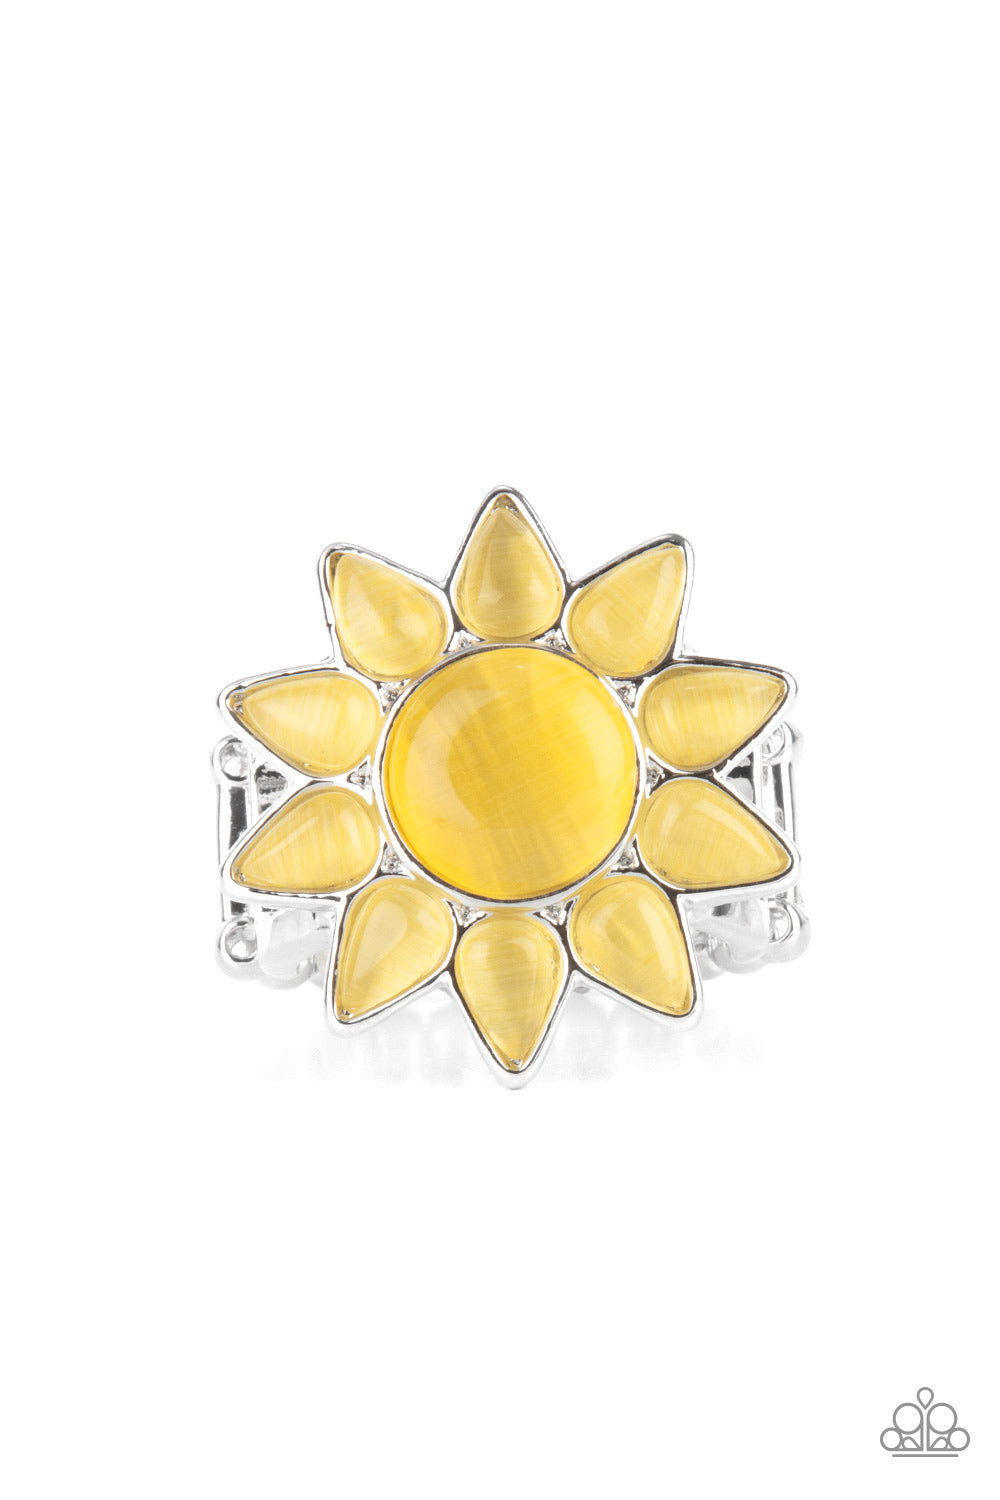 Dainty teardrop yellow cat's eye stones bloom from a round yellow cat's eye stone center, creating a sunny blossom atop the finger. Features a stretchy band for a flexible fit. 